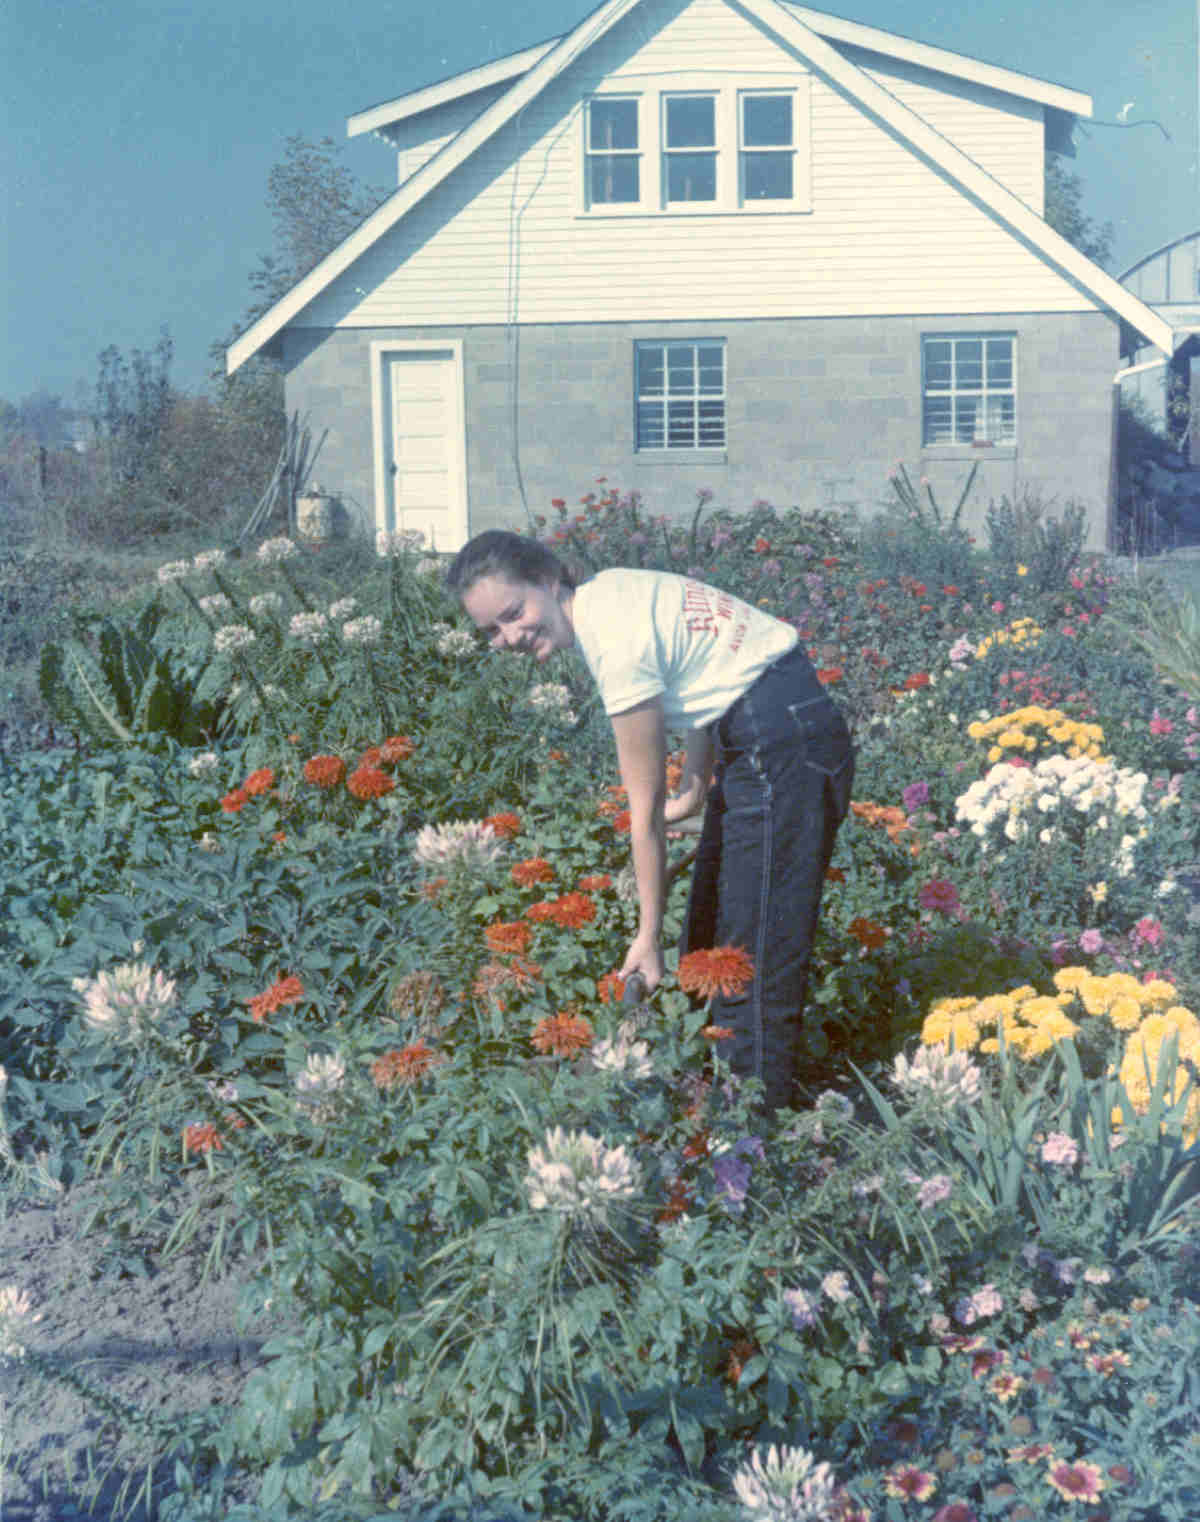 Barbara Klingshirn in her flower garden at the front of the original winery